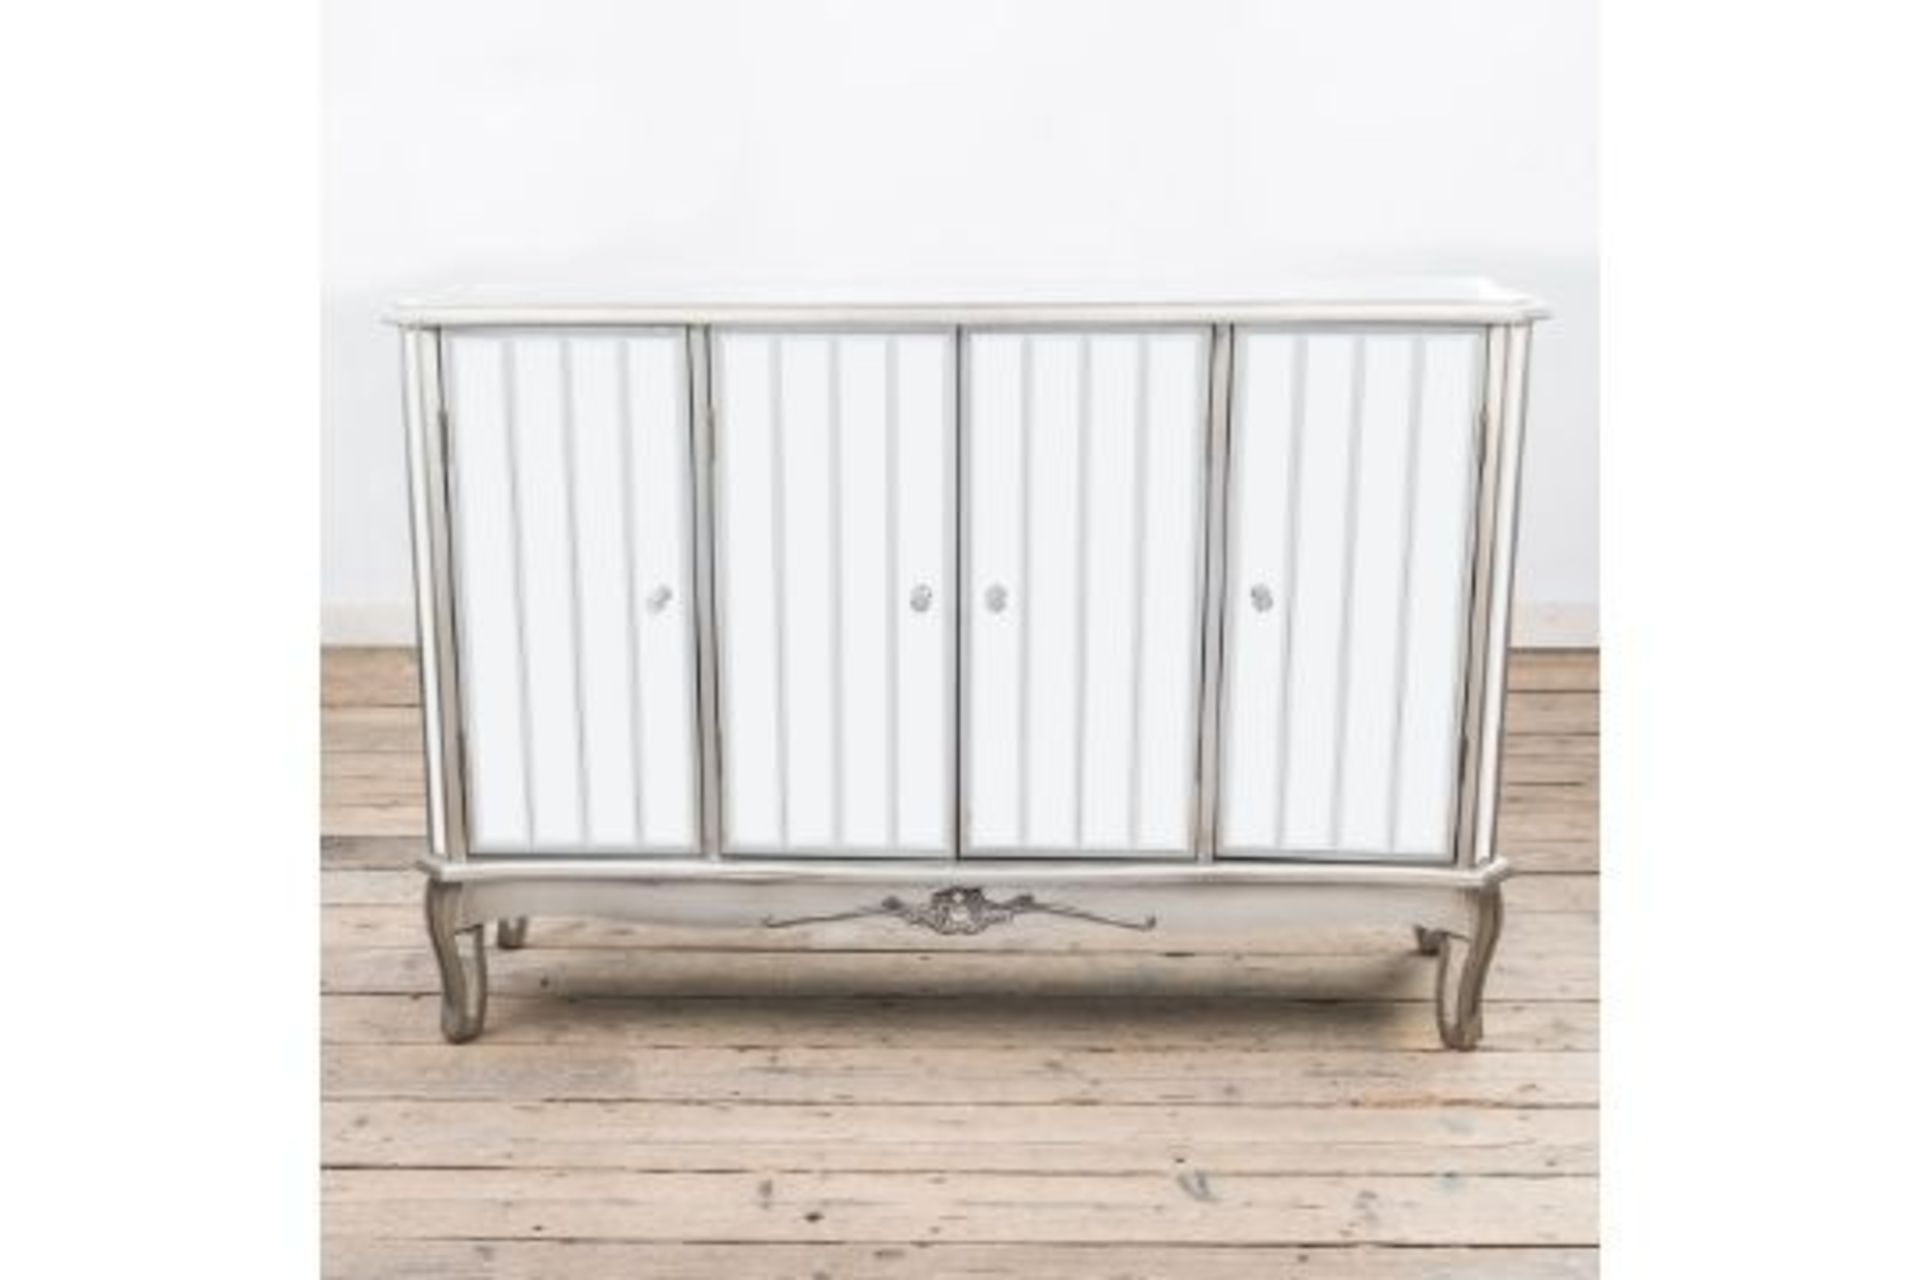 Argente Mirrored Four Door Sideboard This Is One Of The Larger Pieces In This Glamorous Range, - Image 2 of 2